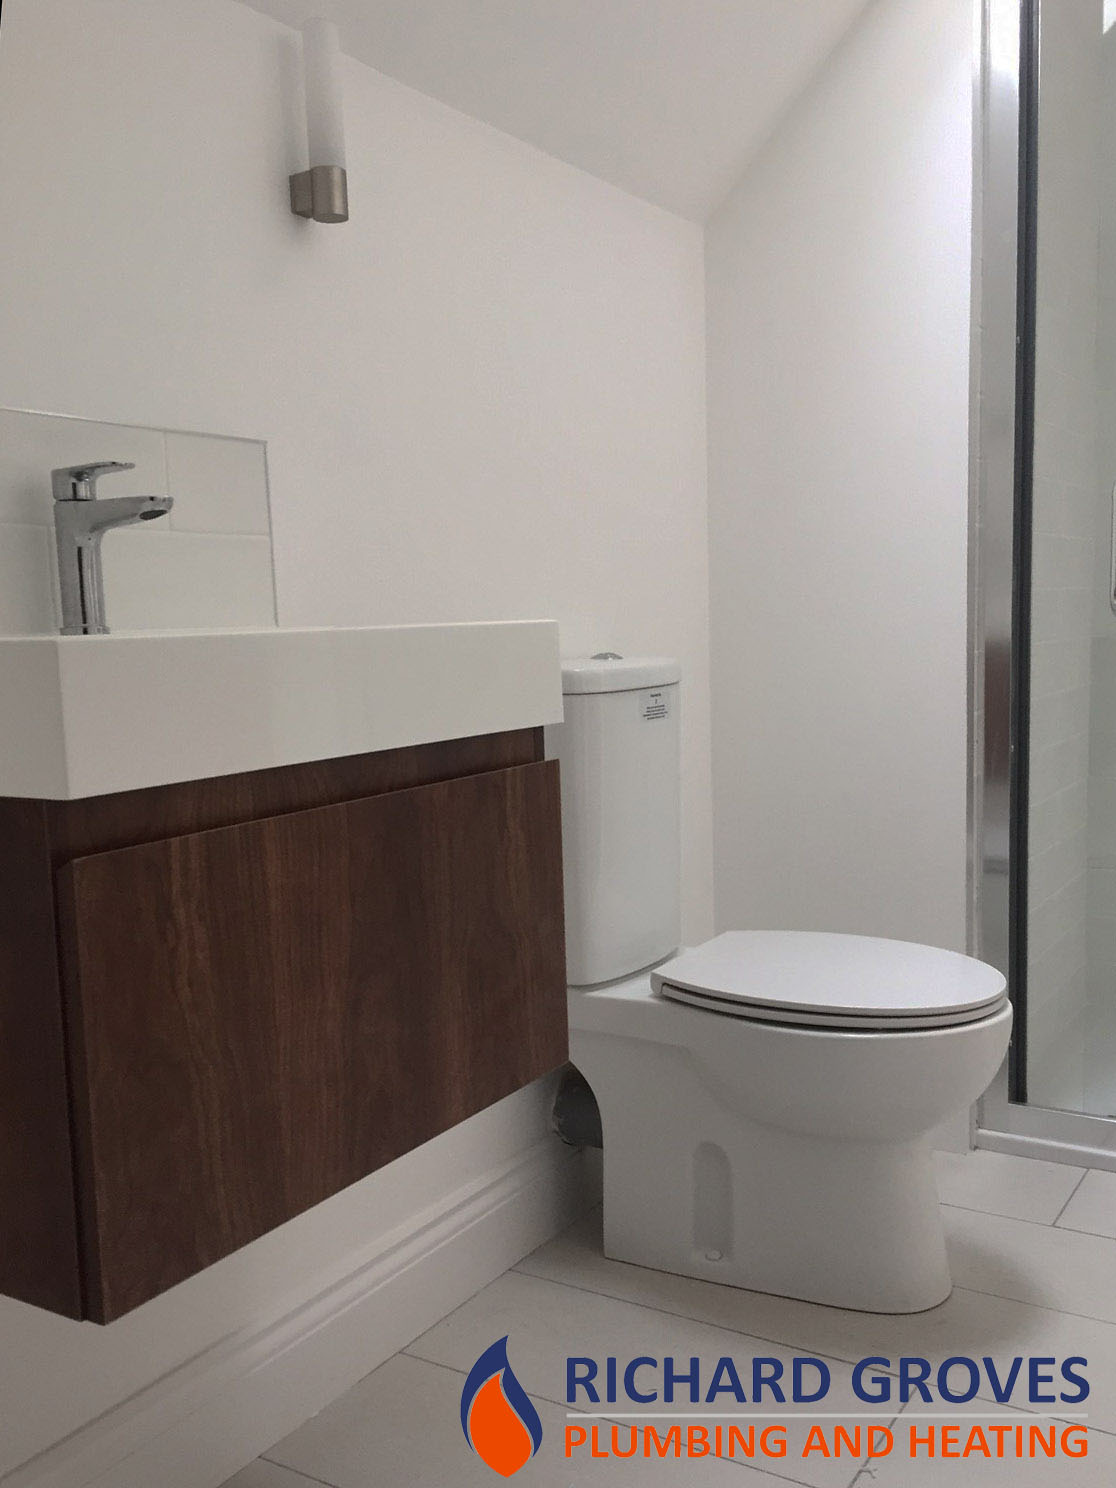 A selection of plumber images in Newquay